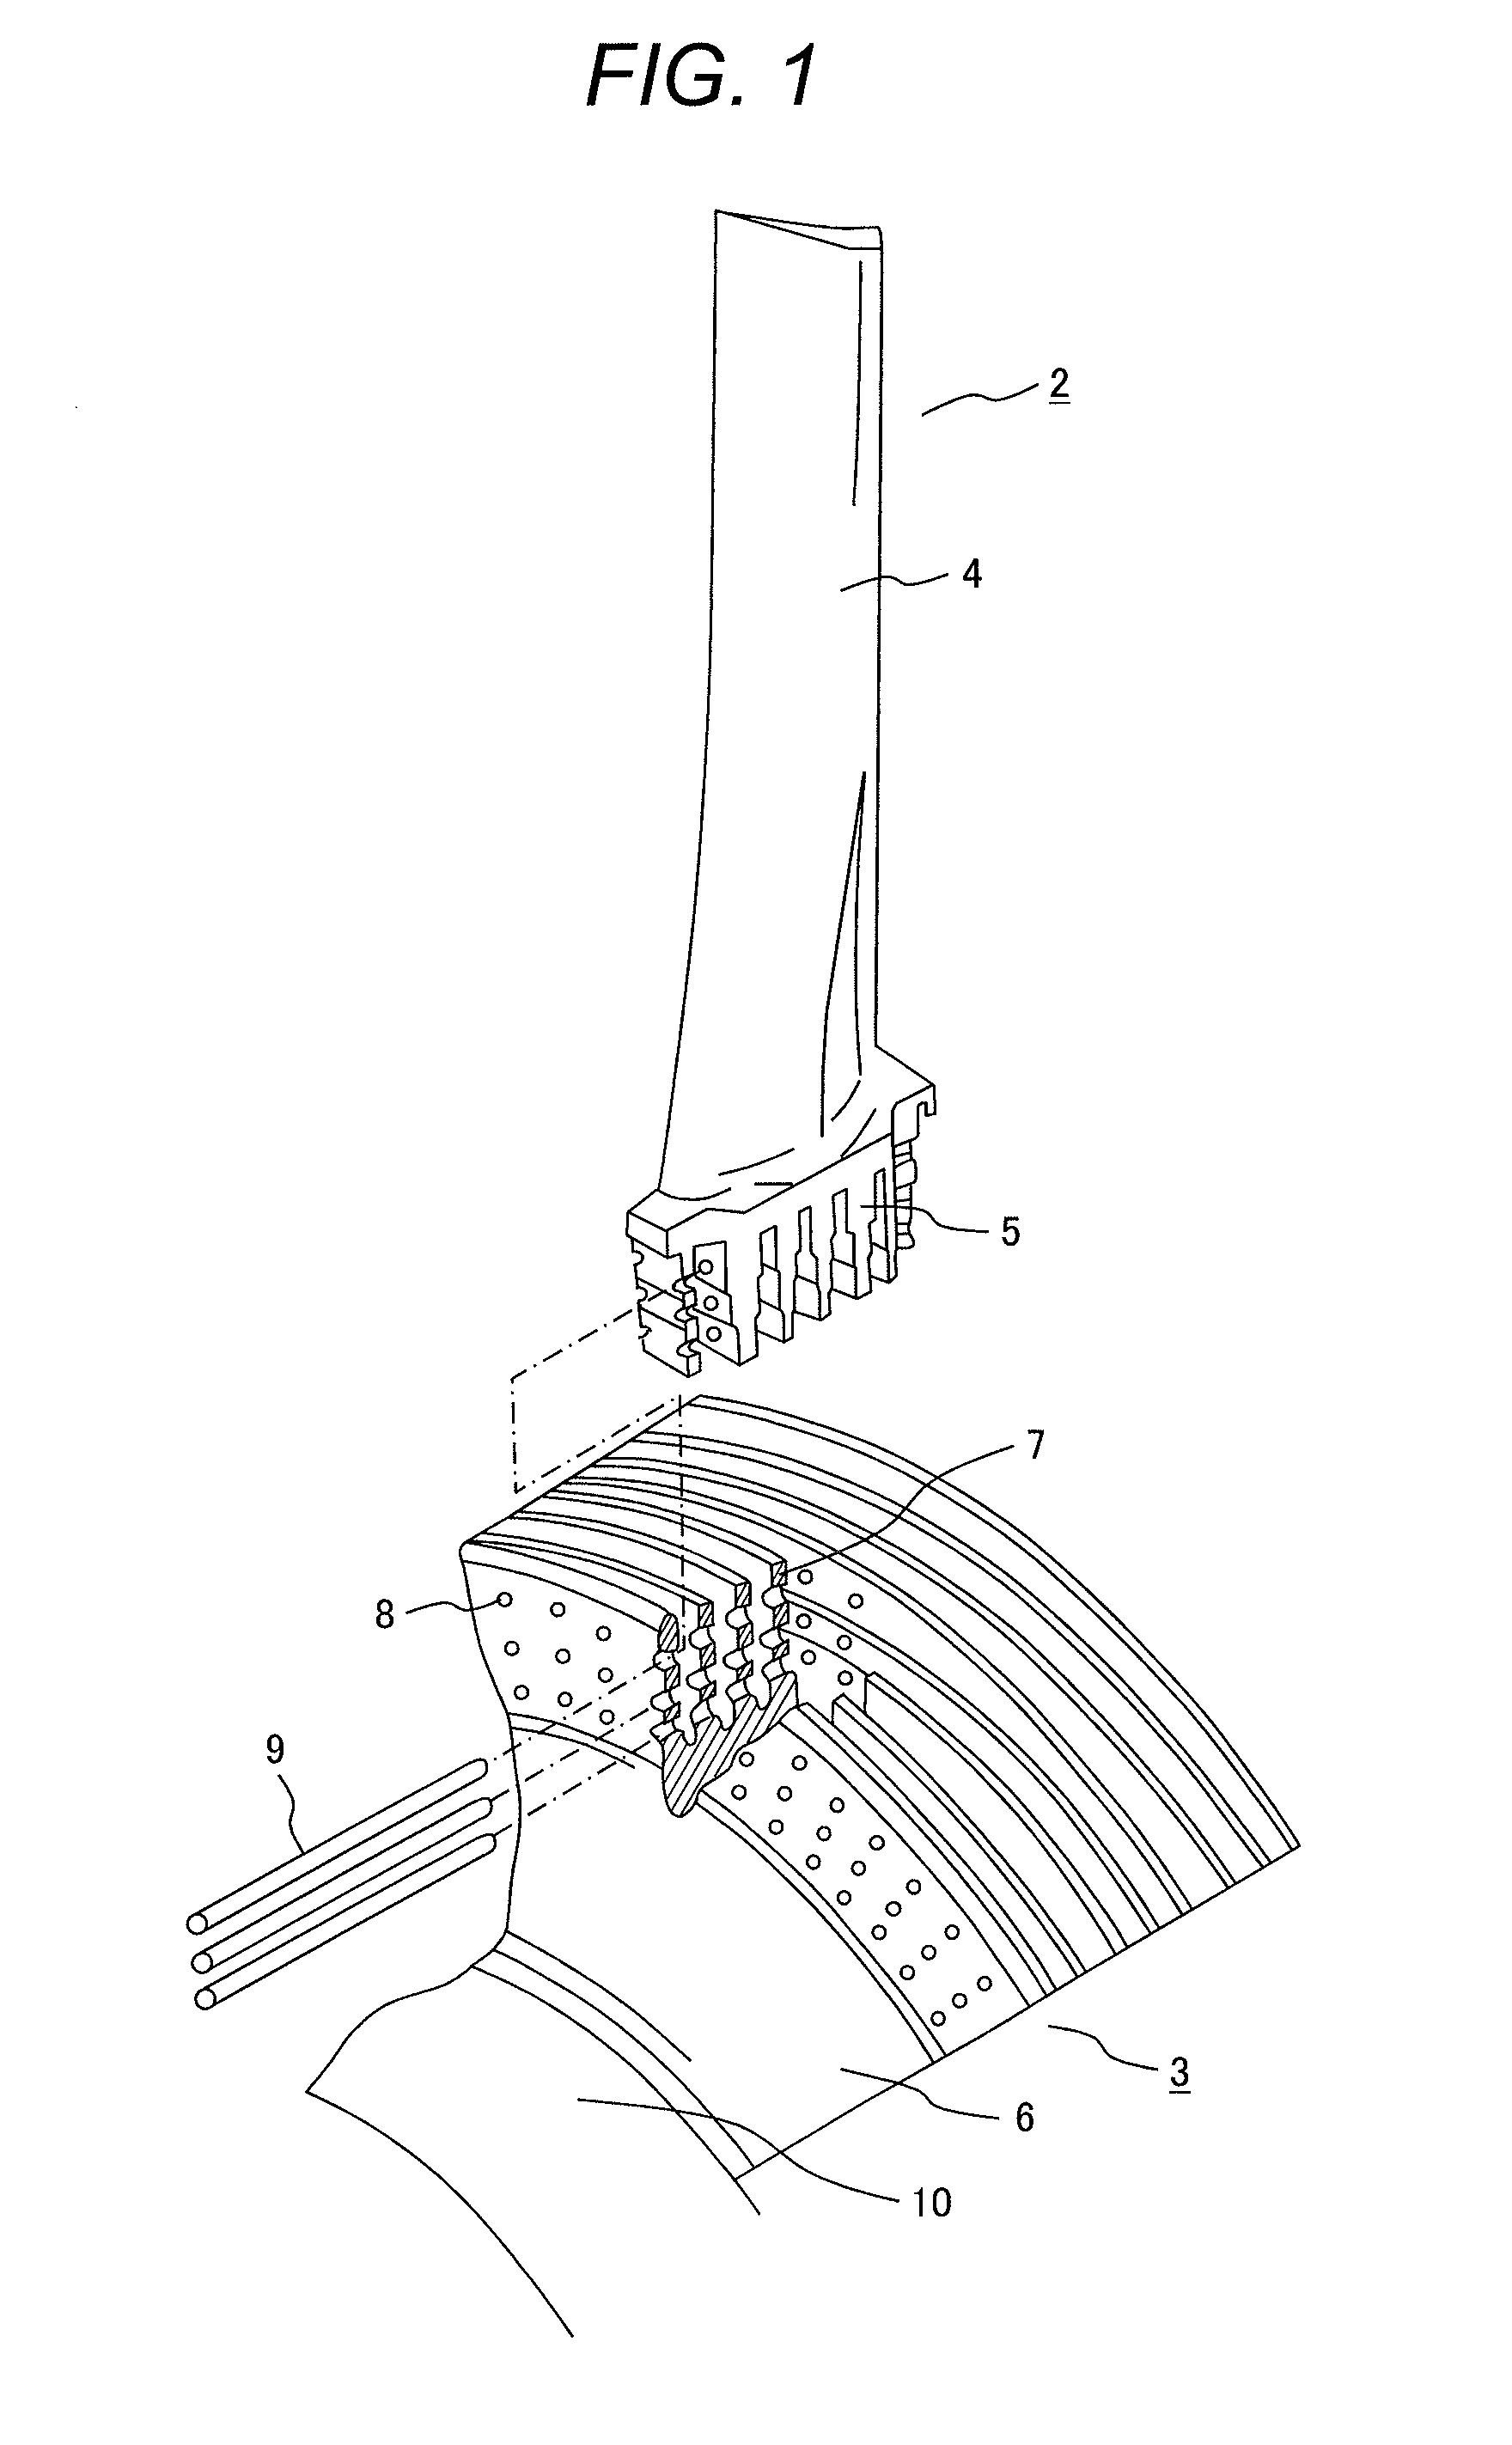 Method for Manufacturing Multi-Finger Pinned Root for Turbine Blade Attached to Turbine Rotor and Turbine Blade